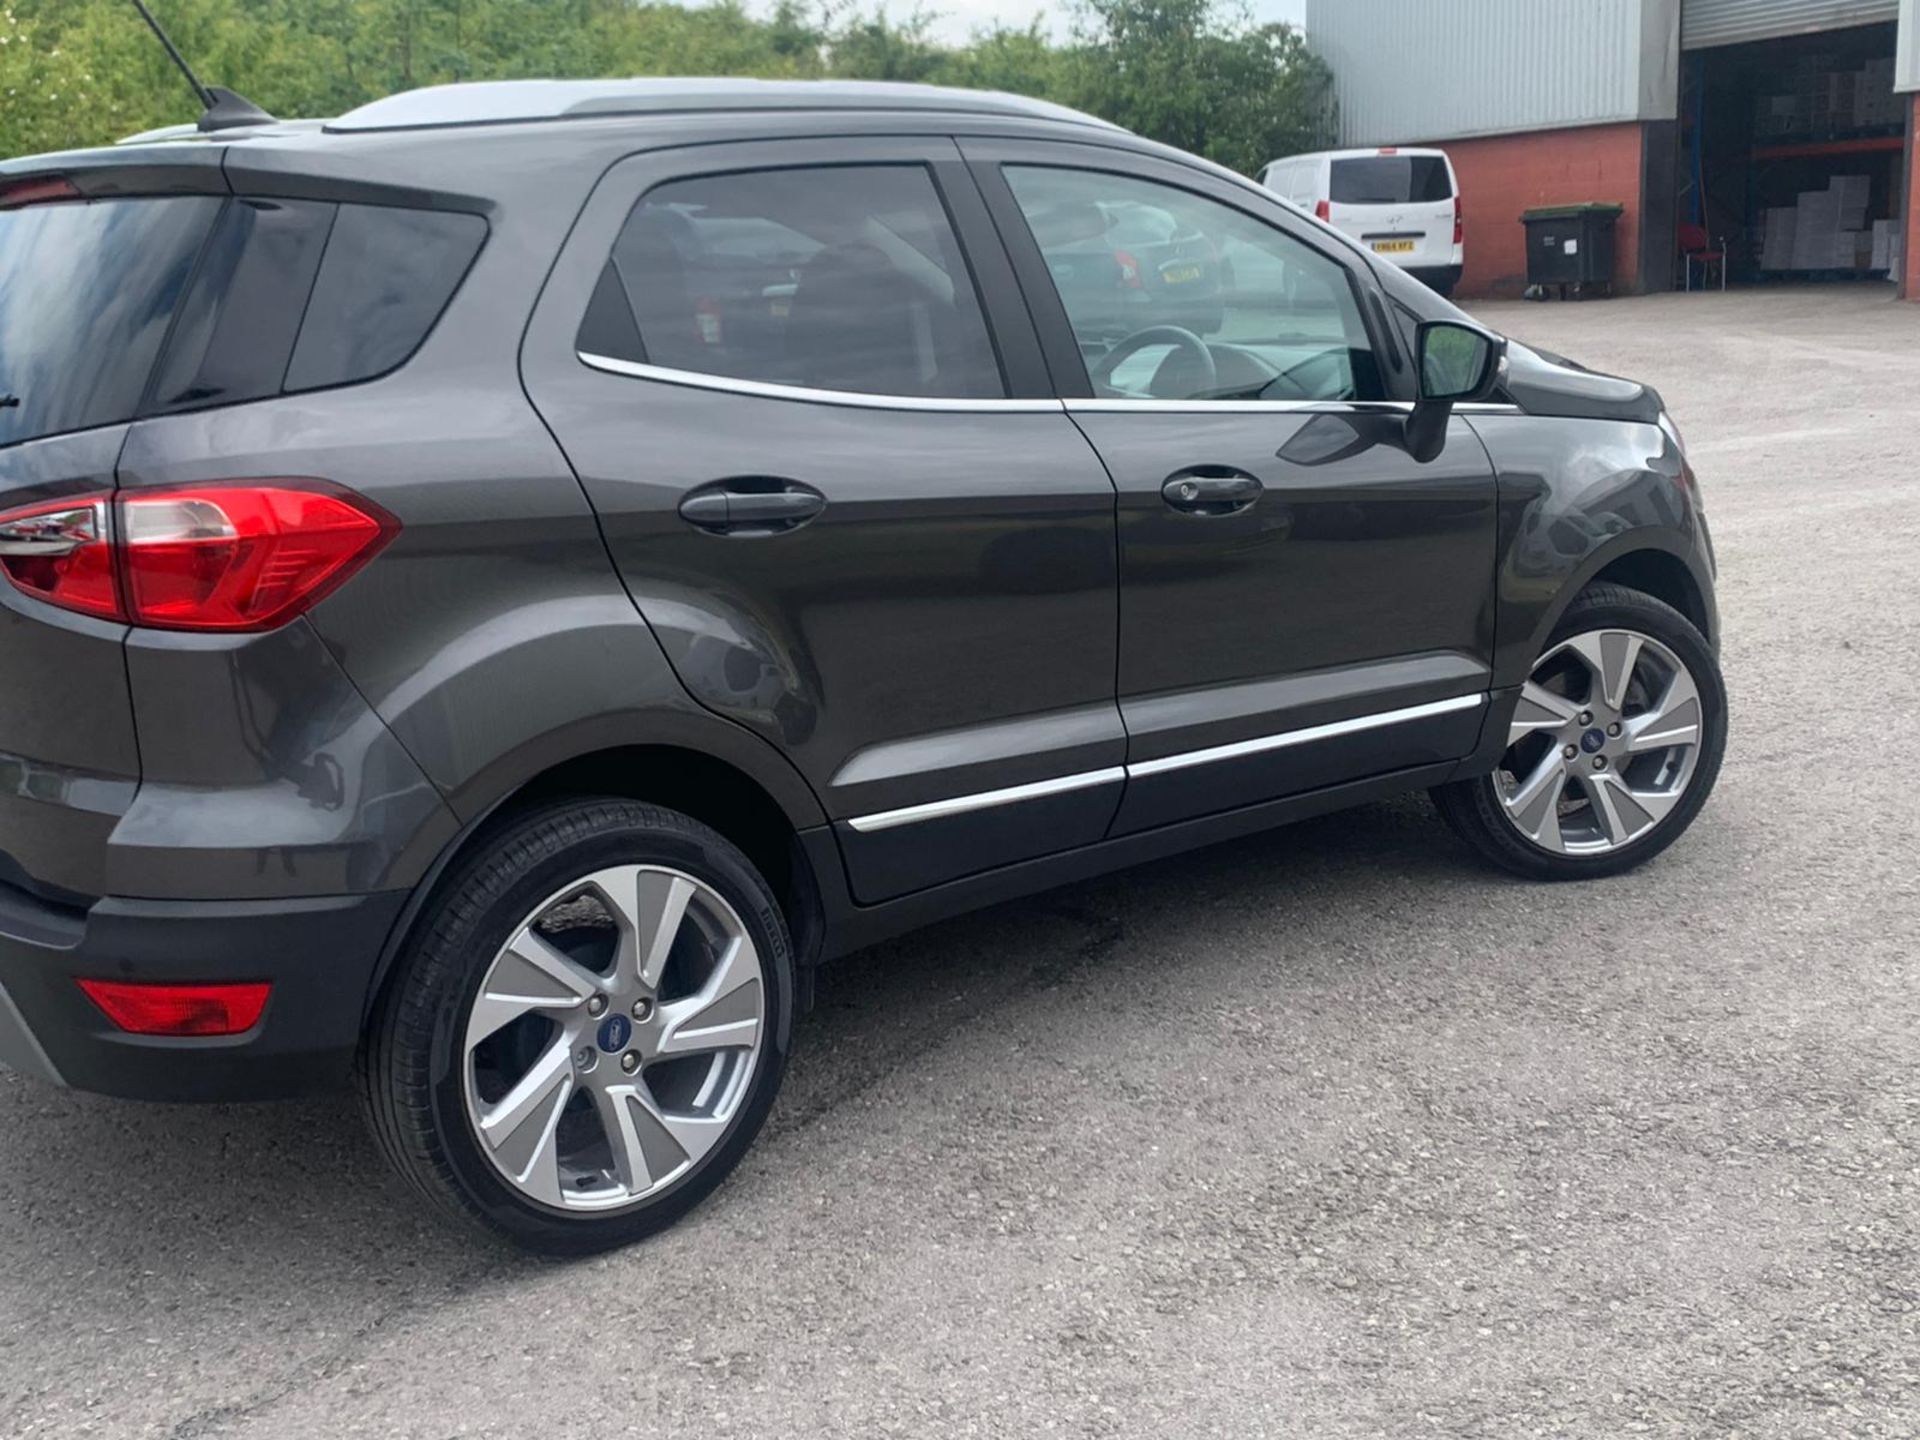 2019/19 REG FORD ECOSPORT TITANIUM 998CC PETROL 125BHP 5DR, SHOWING 0 FORMER KEEPERS *NO VAT* - Image 7 of 14